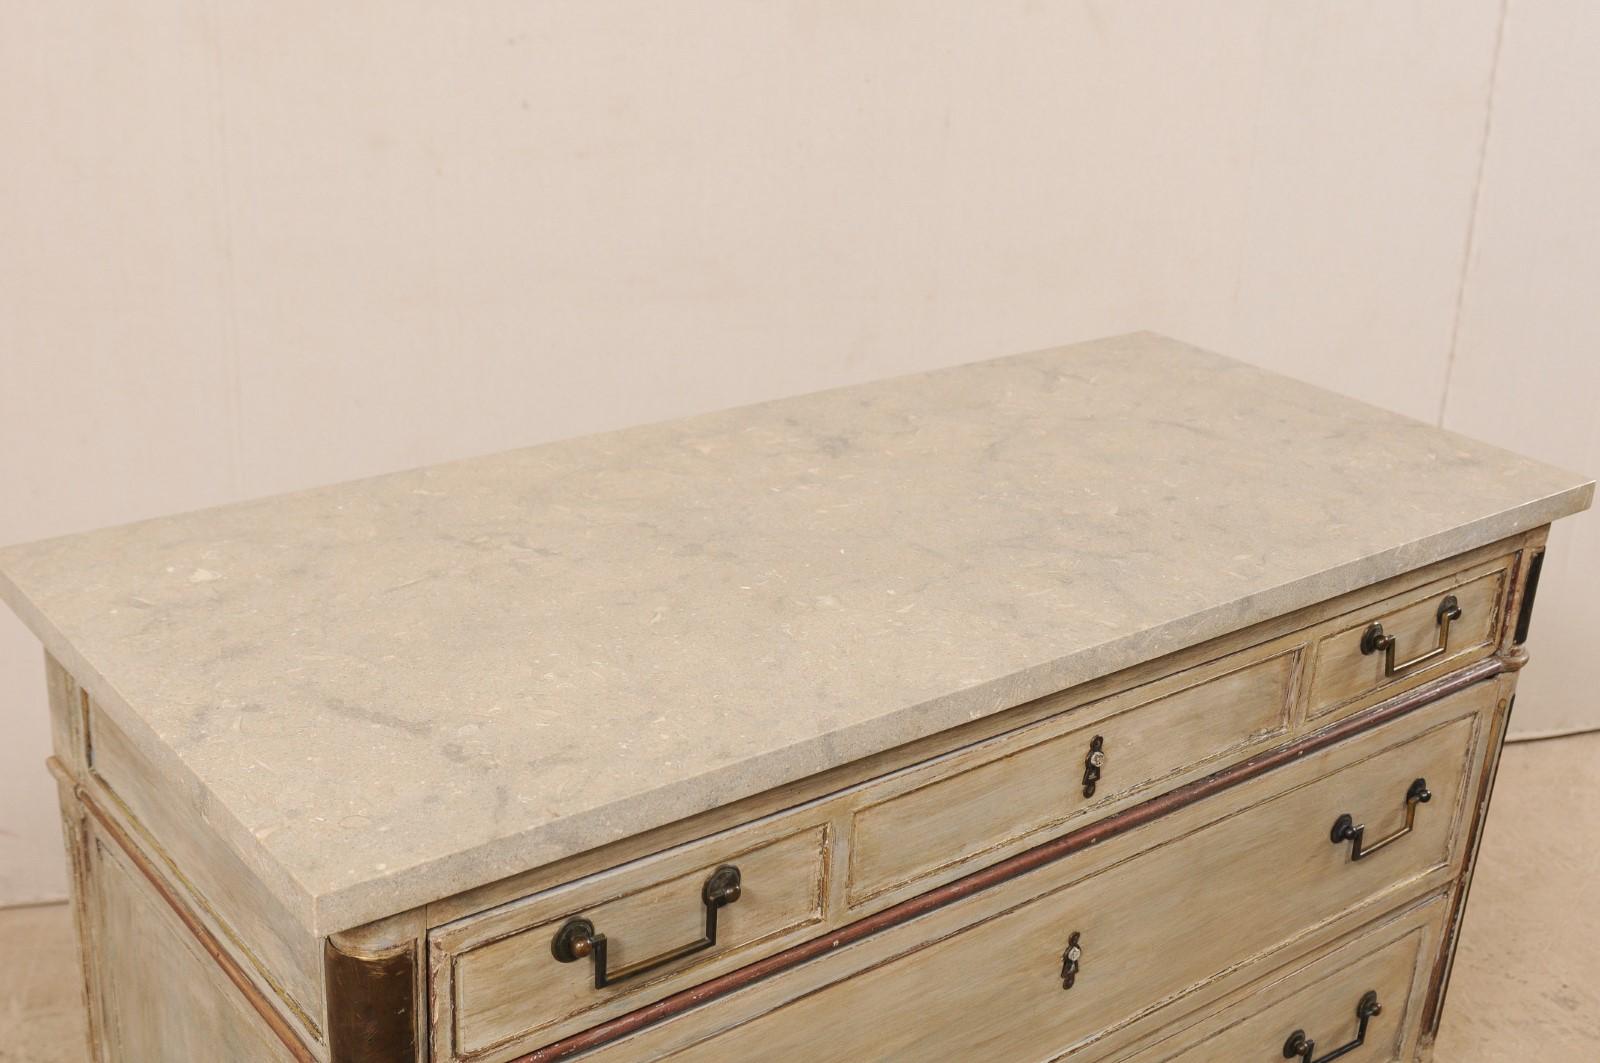 Wood Early 19th C. French Neoclassical Commode with Fossilized Limestone Top